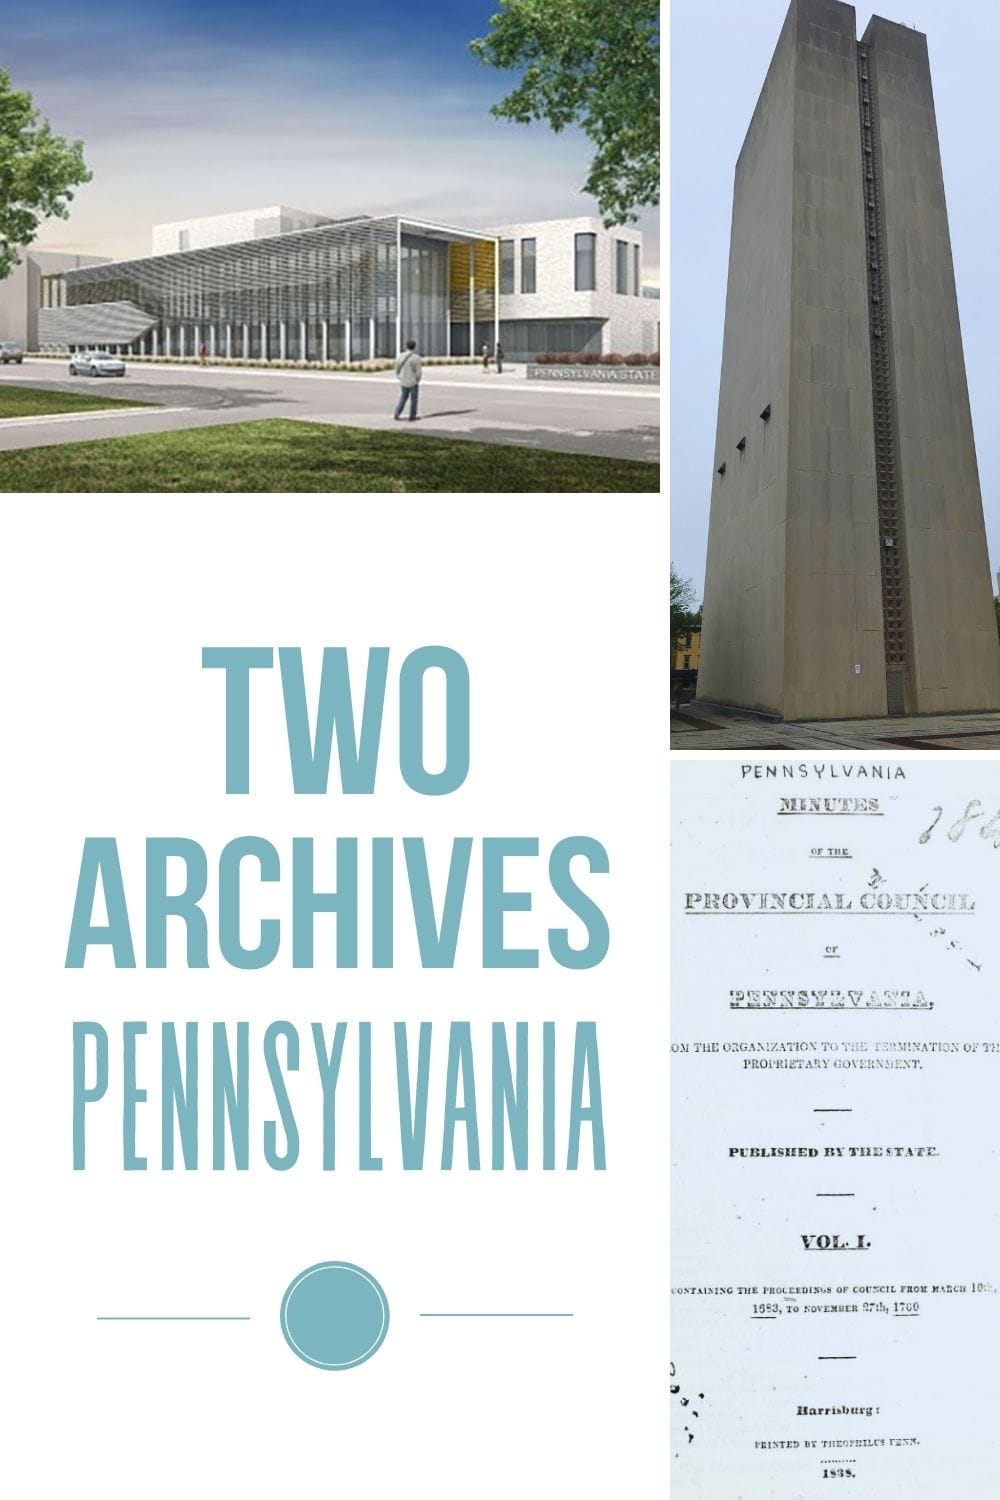 What You Can Find in the Pennsylvania Archives Book Series